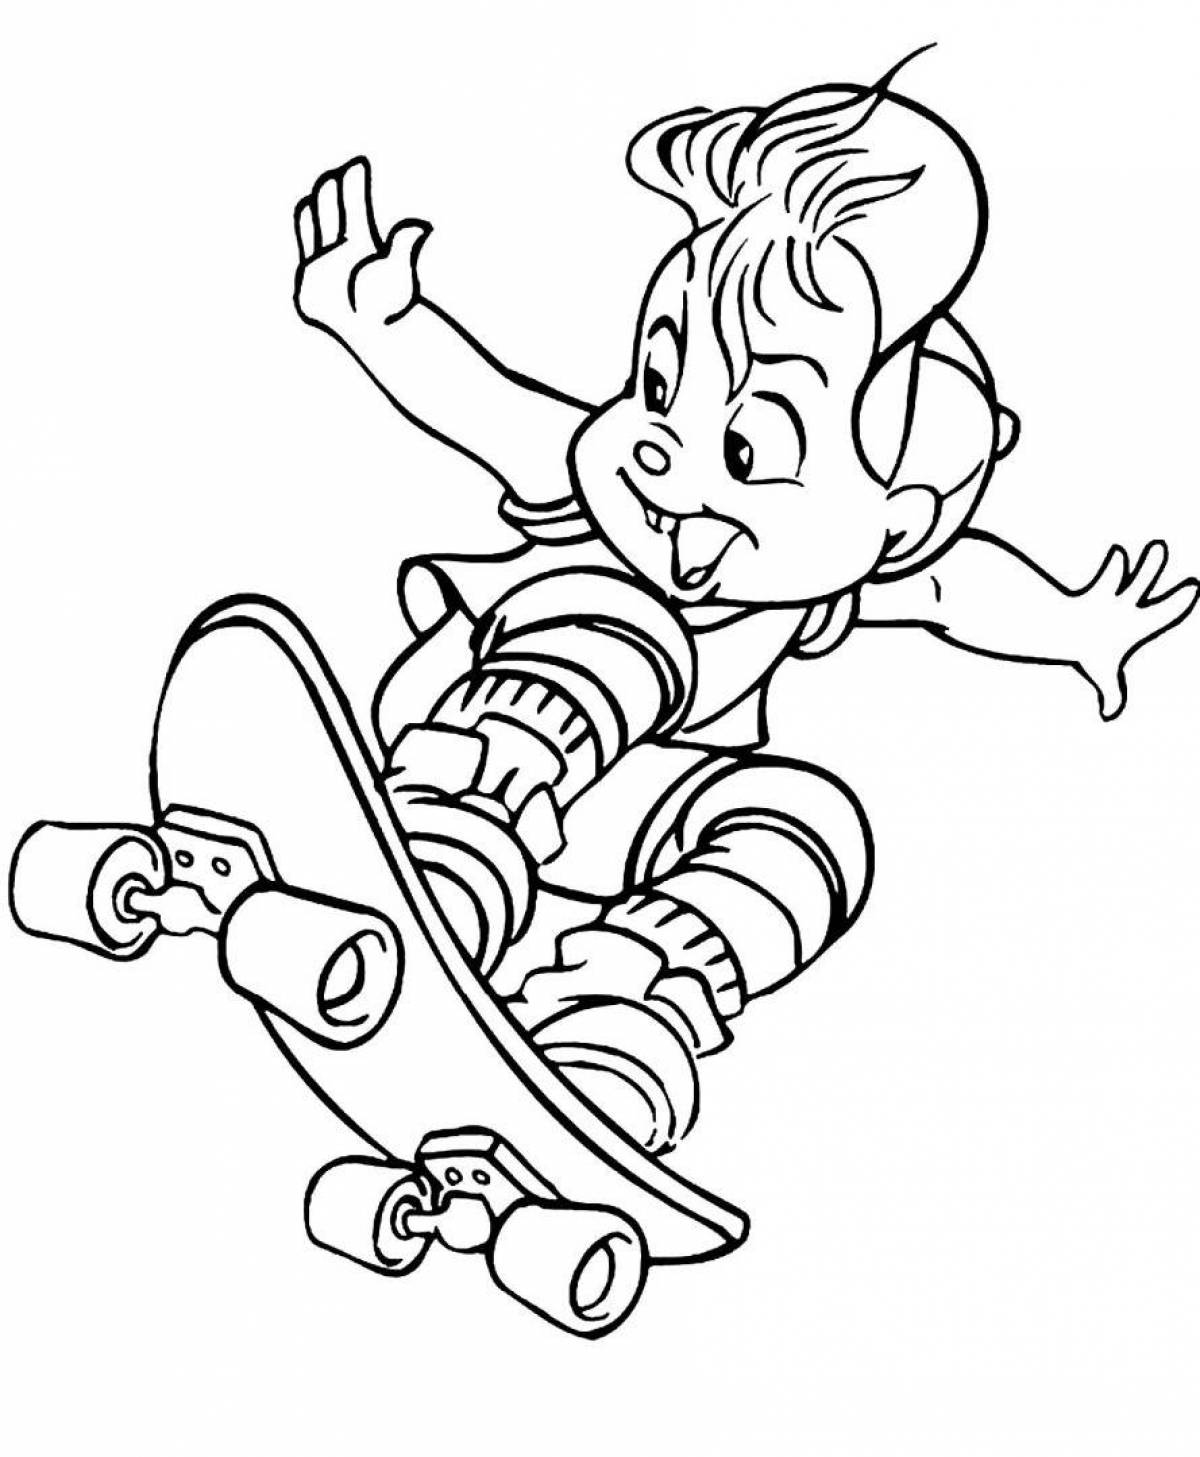 Cute baby coloring page edge